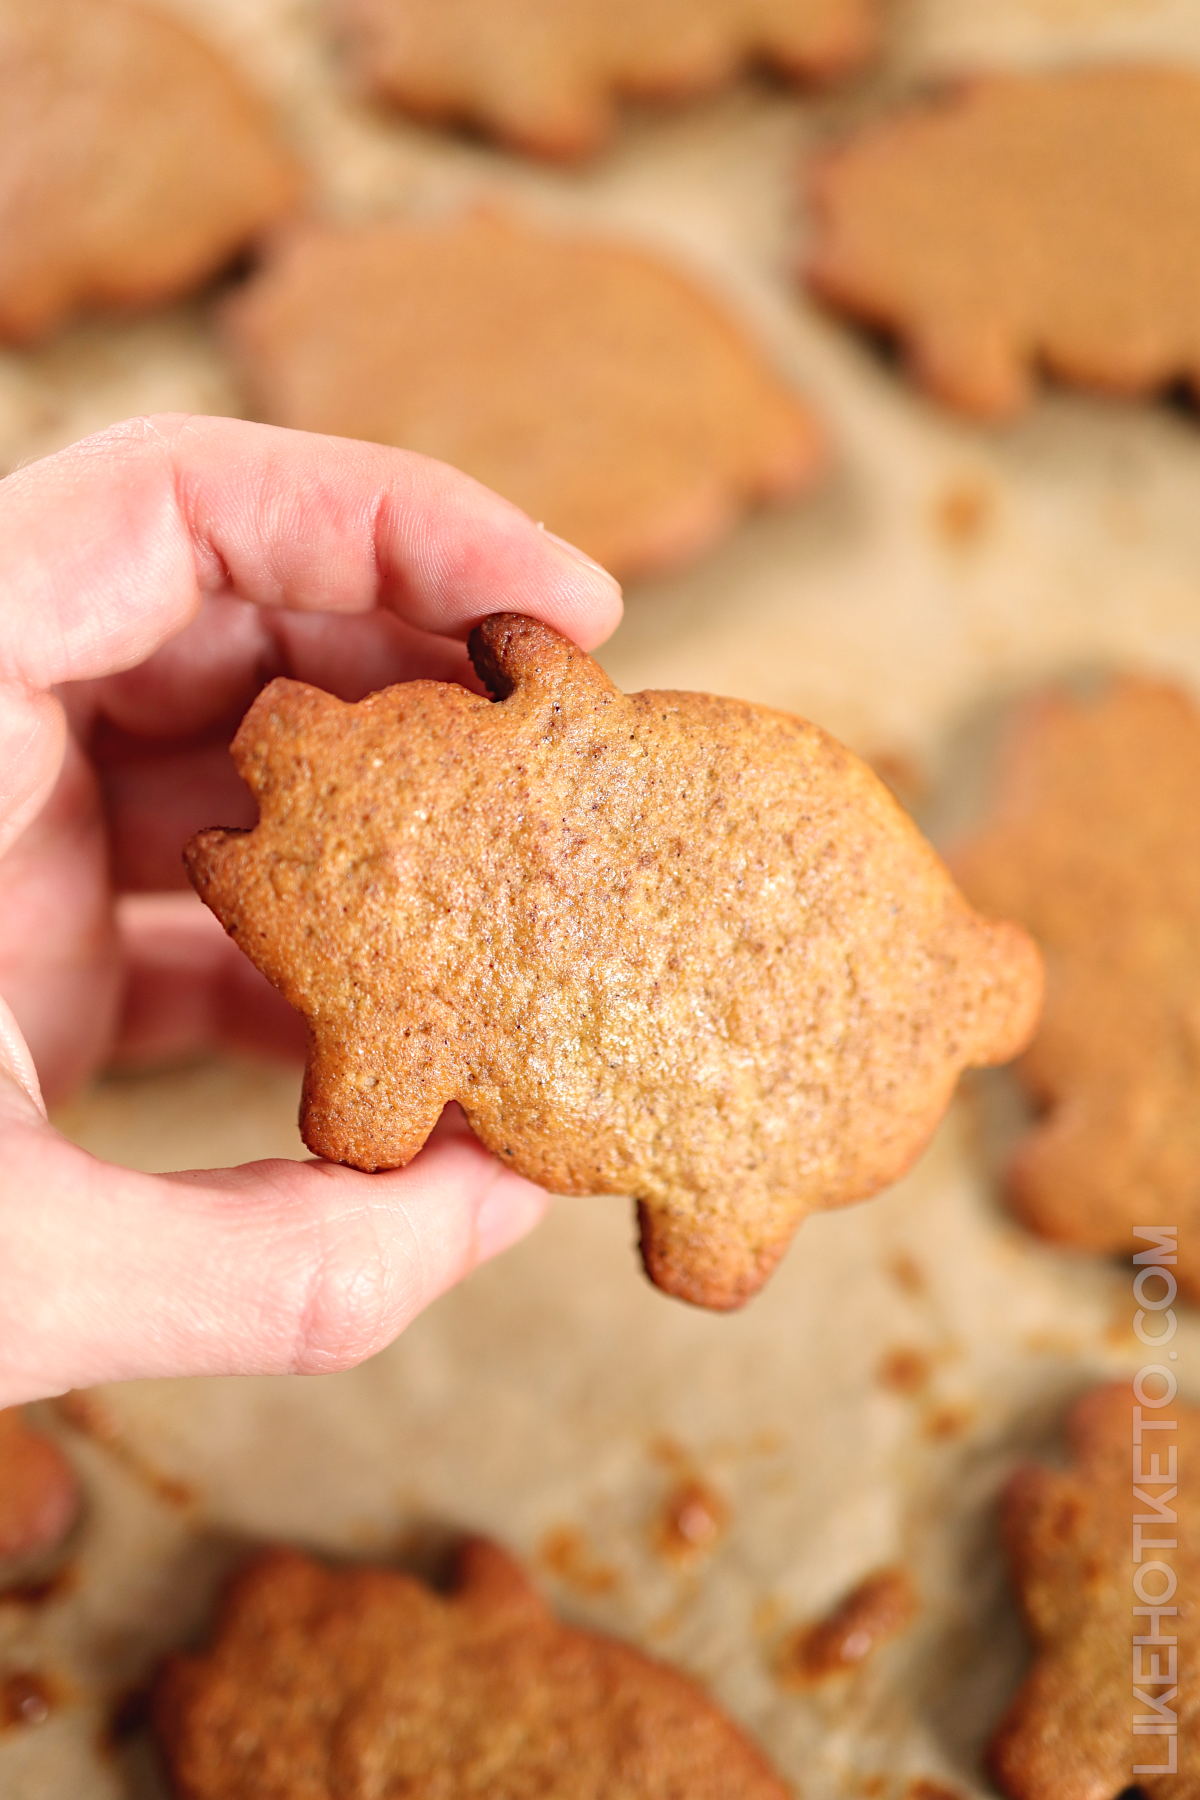 A hand holding a pig shaped marranito cookie.